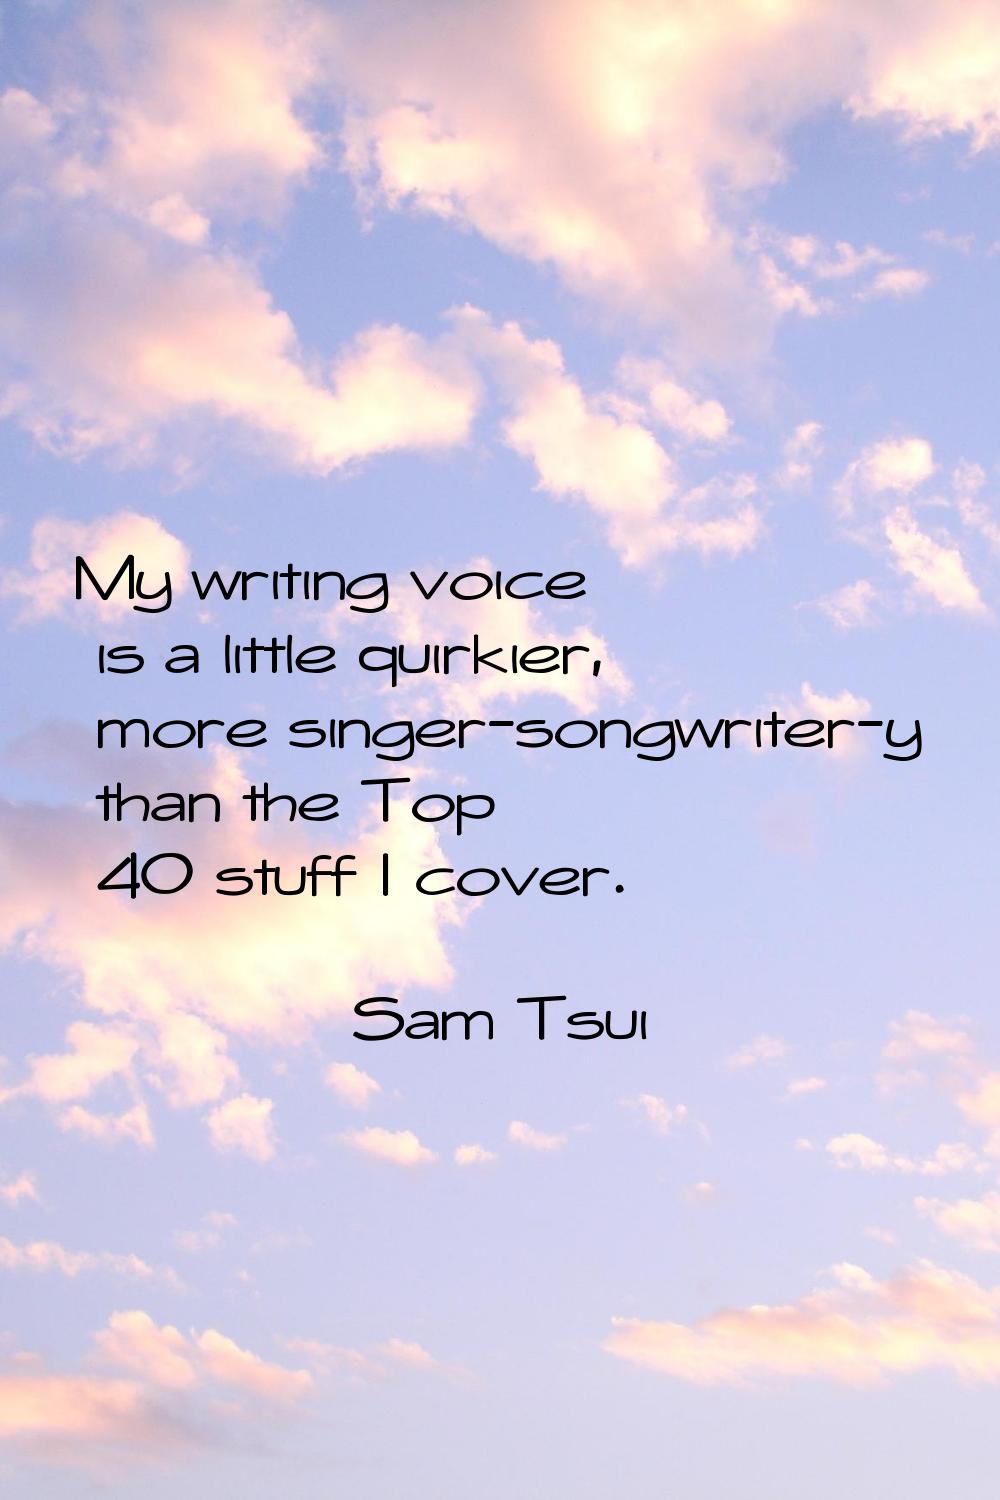 My writing voice is a little quirkier, more singer-songwriter-y than the Top 40 stuff I cover.